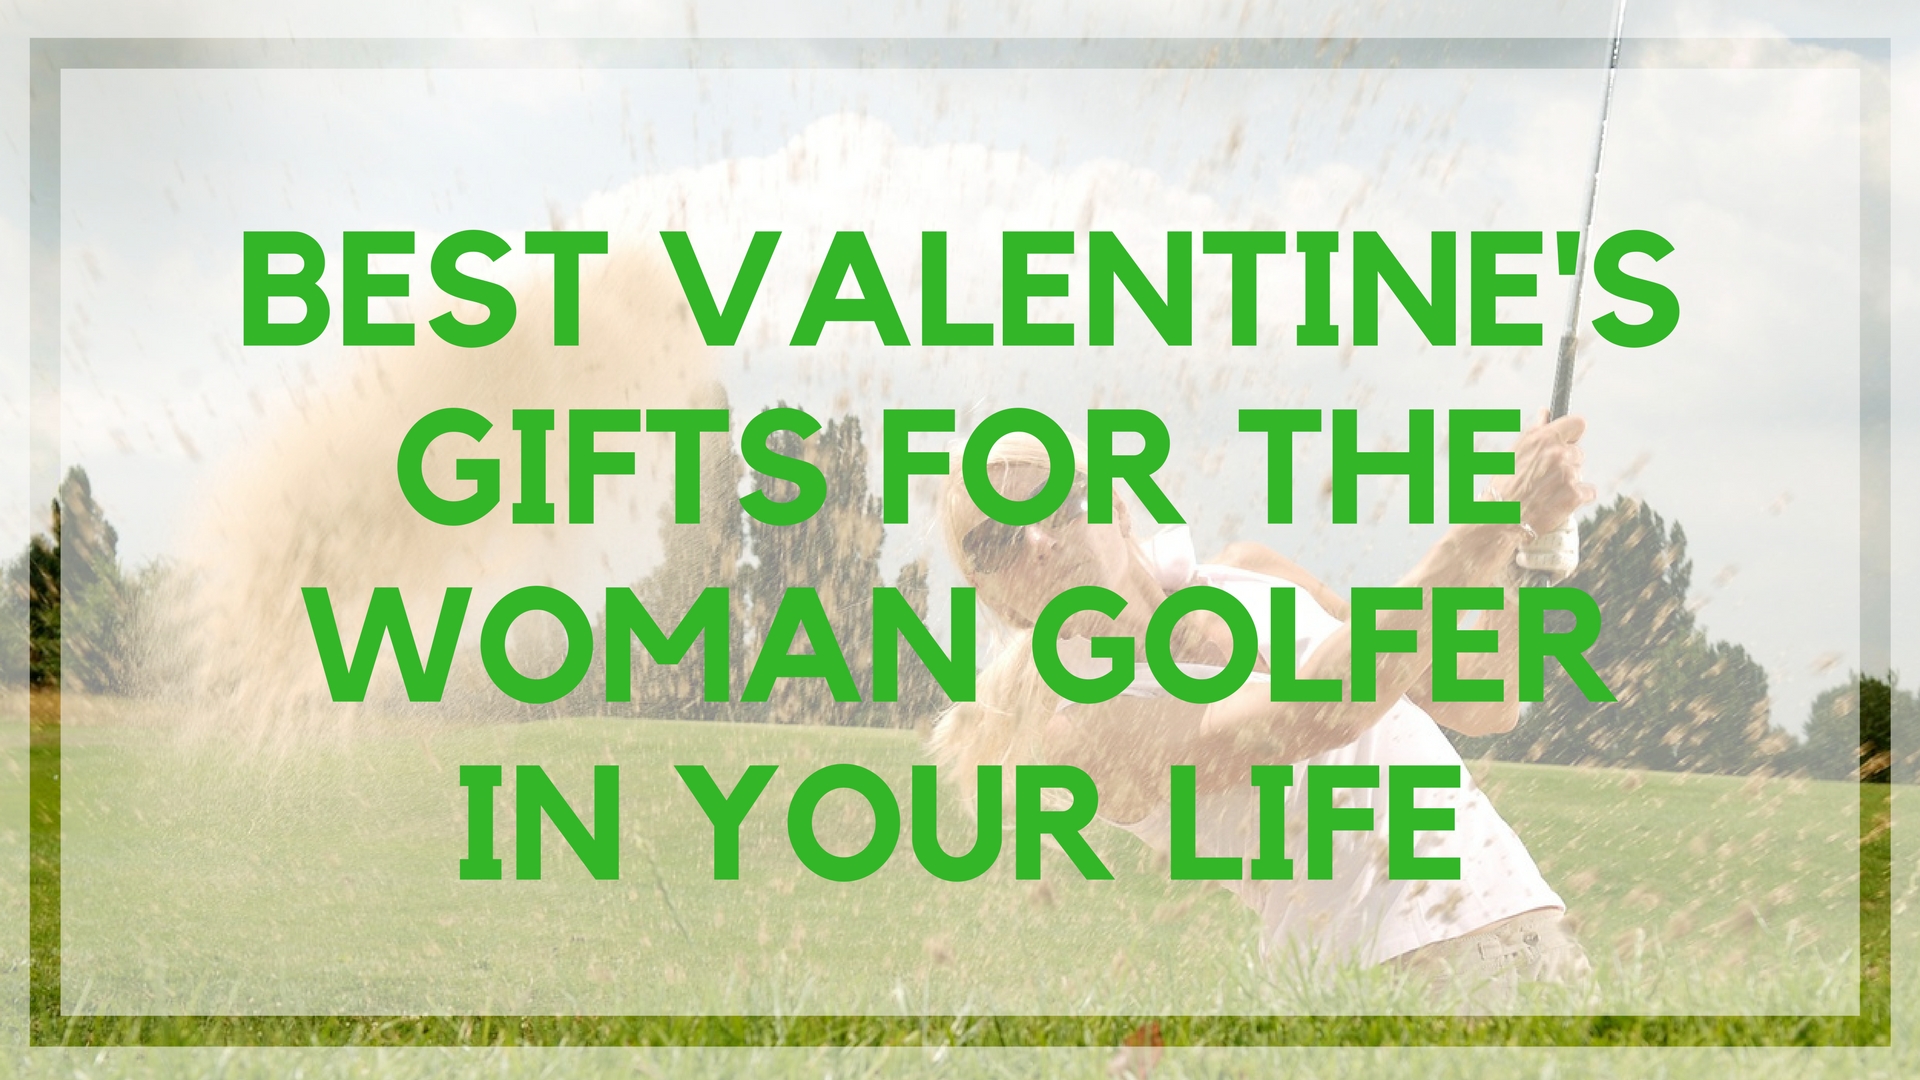 small golf gifts for ladies